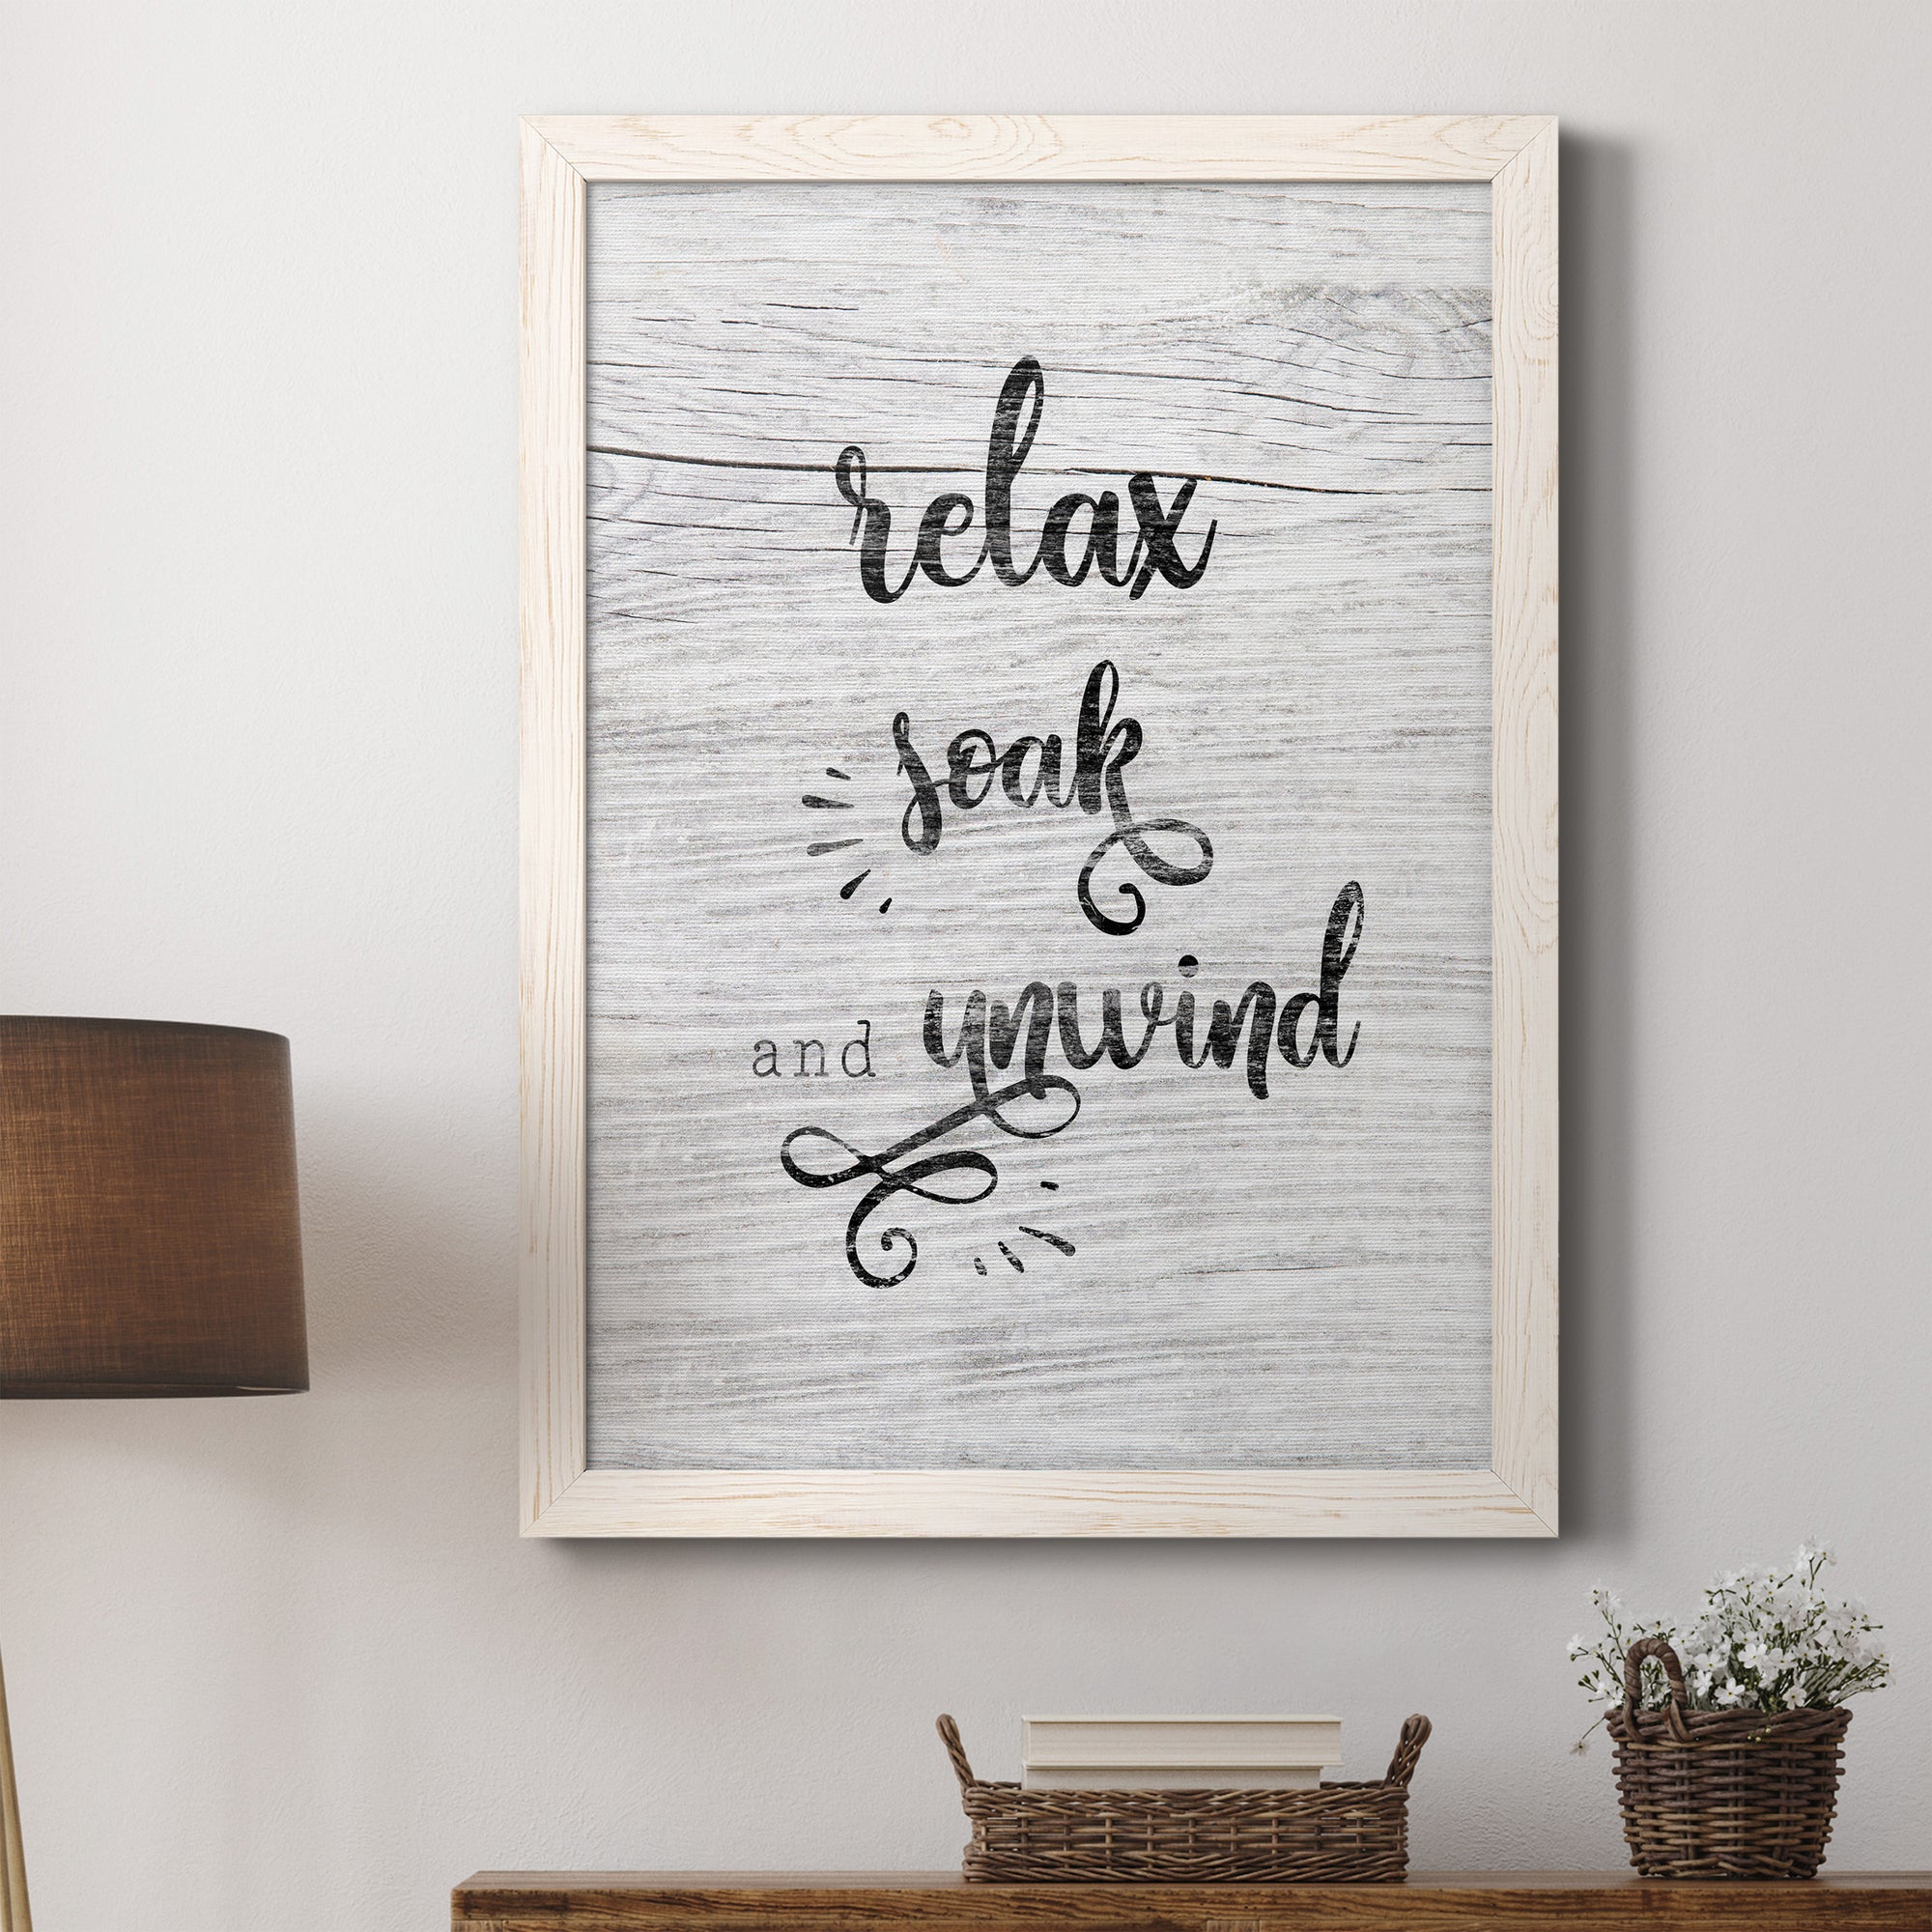 Relax Soak Unwind - Premium Canvas Framed in Barnwood - Ready to Hang